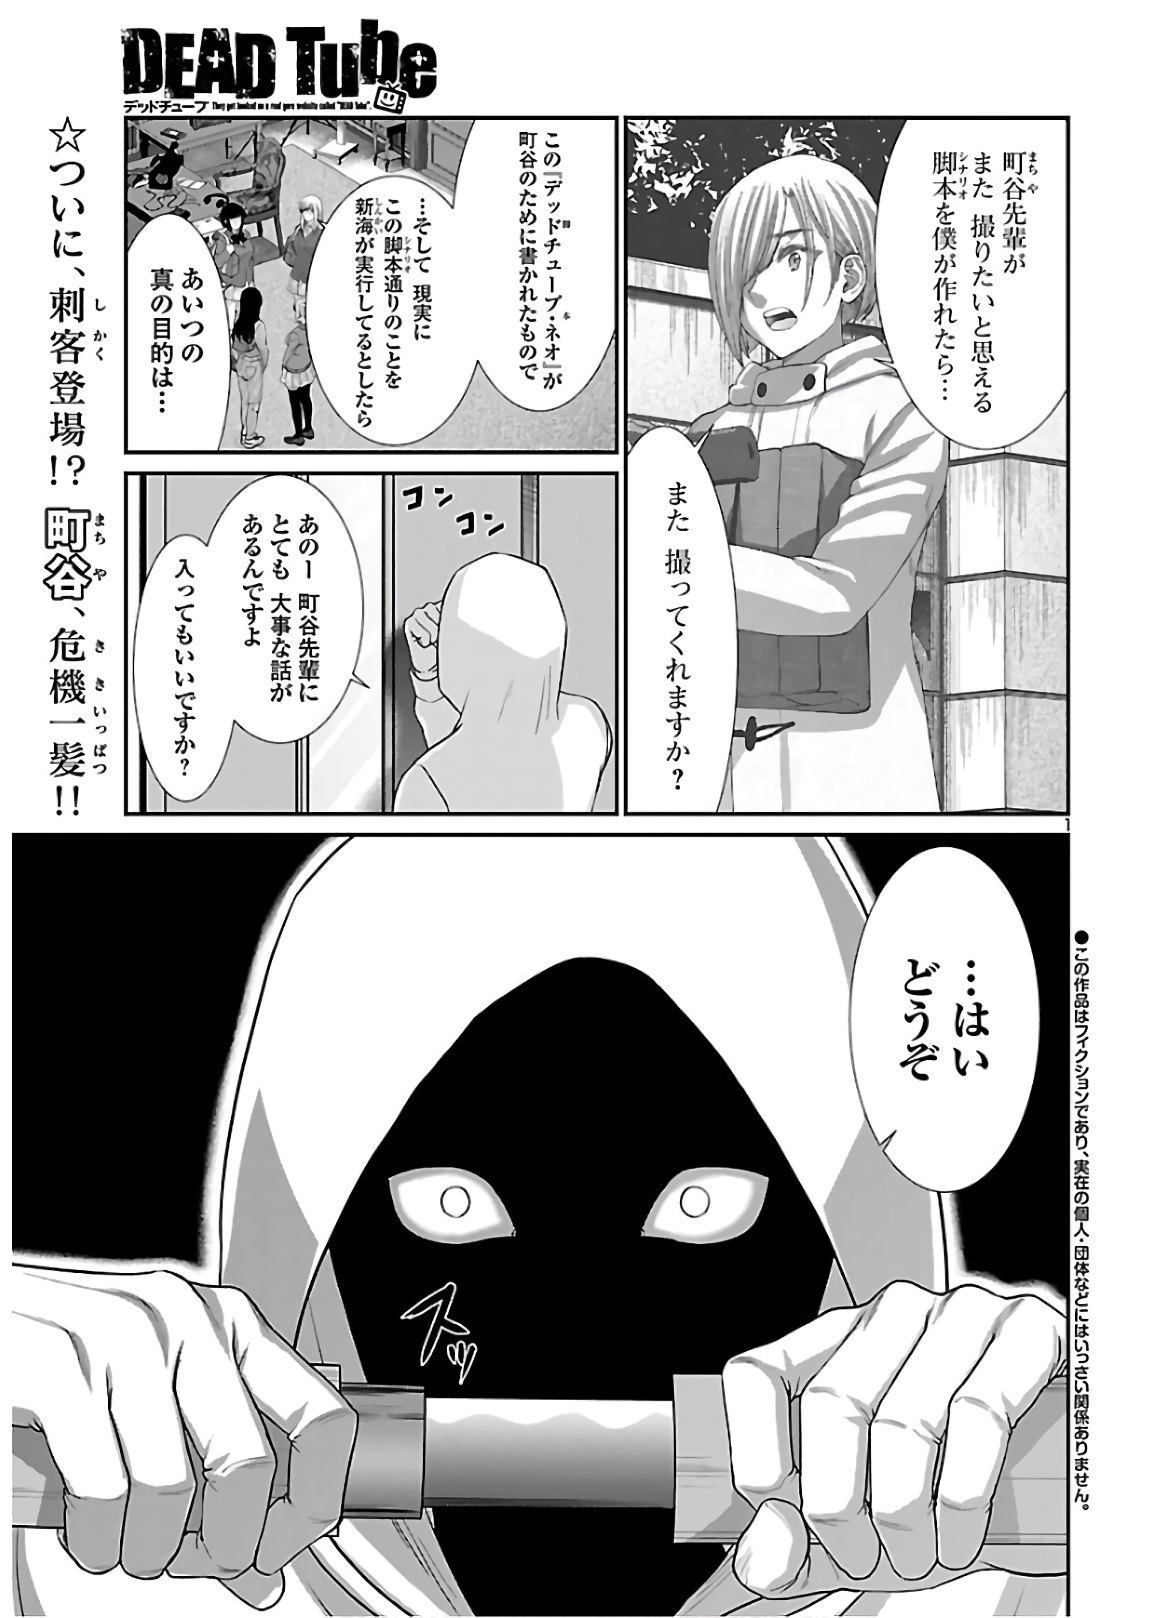 DEADTube~デッドチューブ~ 第65話 - Page 1